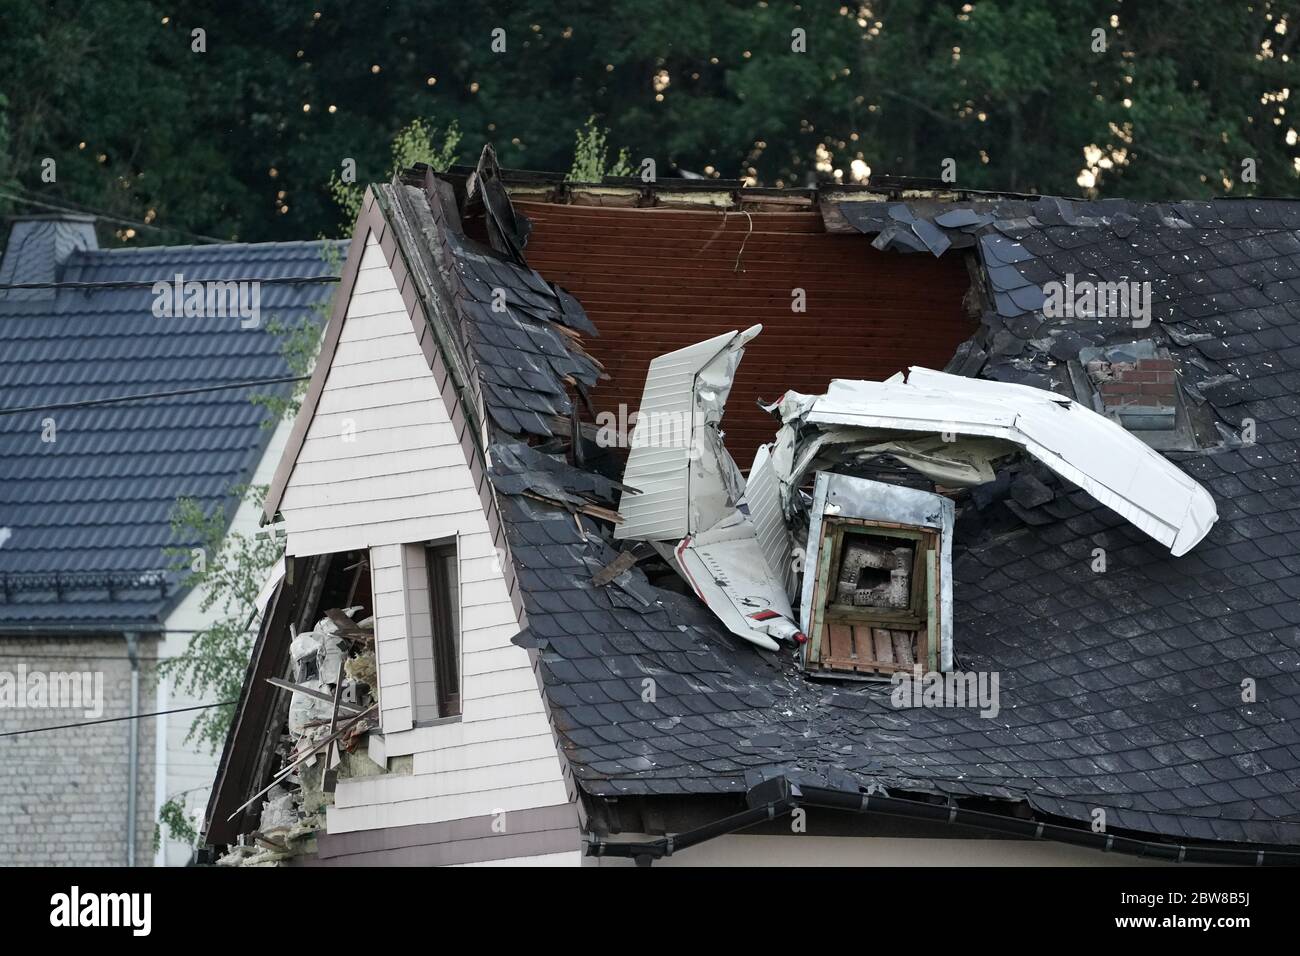 Langenhahn, Germany. 30th May, 2020. Parts of the wreckage of a small airplane protrude from the roof of a residential building. A small plane crashed into the roof of a house in Langenhahn in the Westerwald district on Saturday. The pilot was injured and was taken to hospital, a police spokesperson said. Credit: Thomas Frey/dpa/Alamy Live News Stock Photo